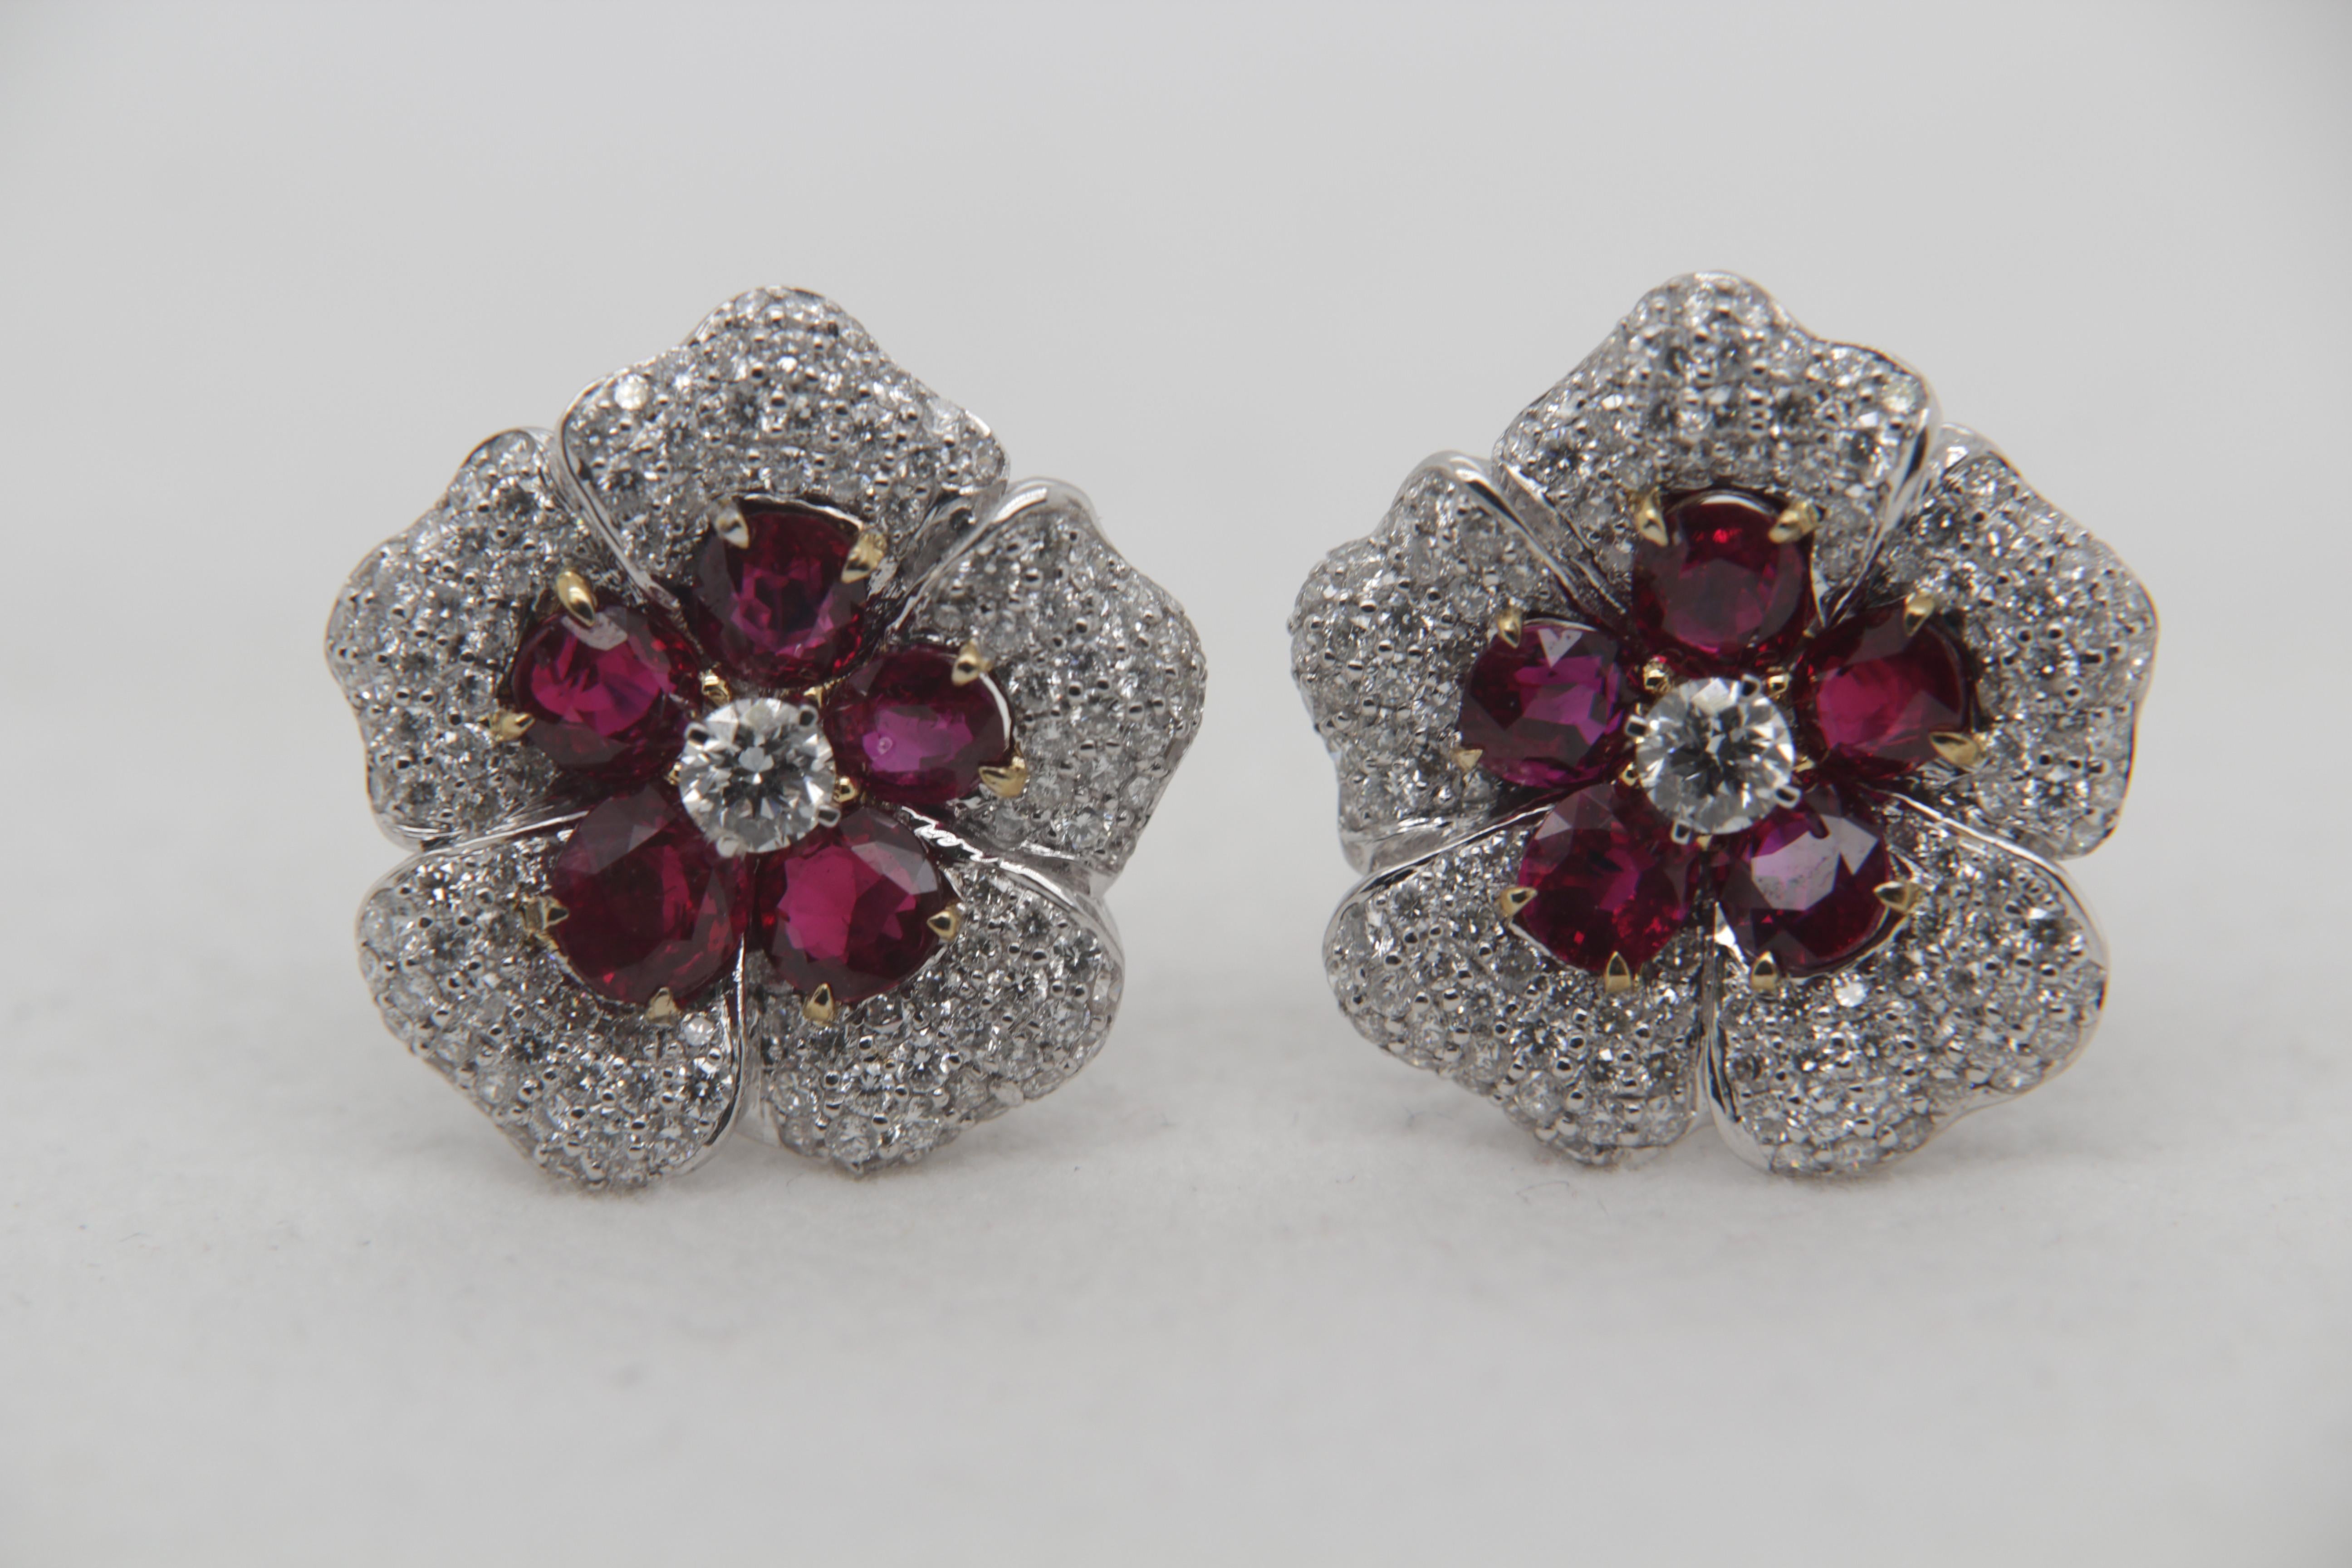 A brand new ruby and diamond earring in 18k gold. The total ruby weight is 5.04 carats for ten pieces and one piece weight 0.49 cts. is certified by Gem Research Swiss lab (GRS) as natural, no heat, and 'Vivid Red Pigeon's Blood' . The total diamond